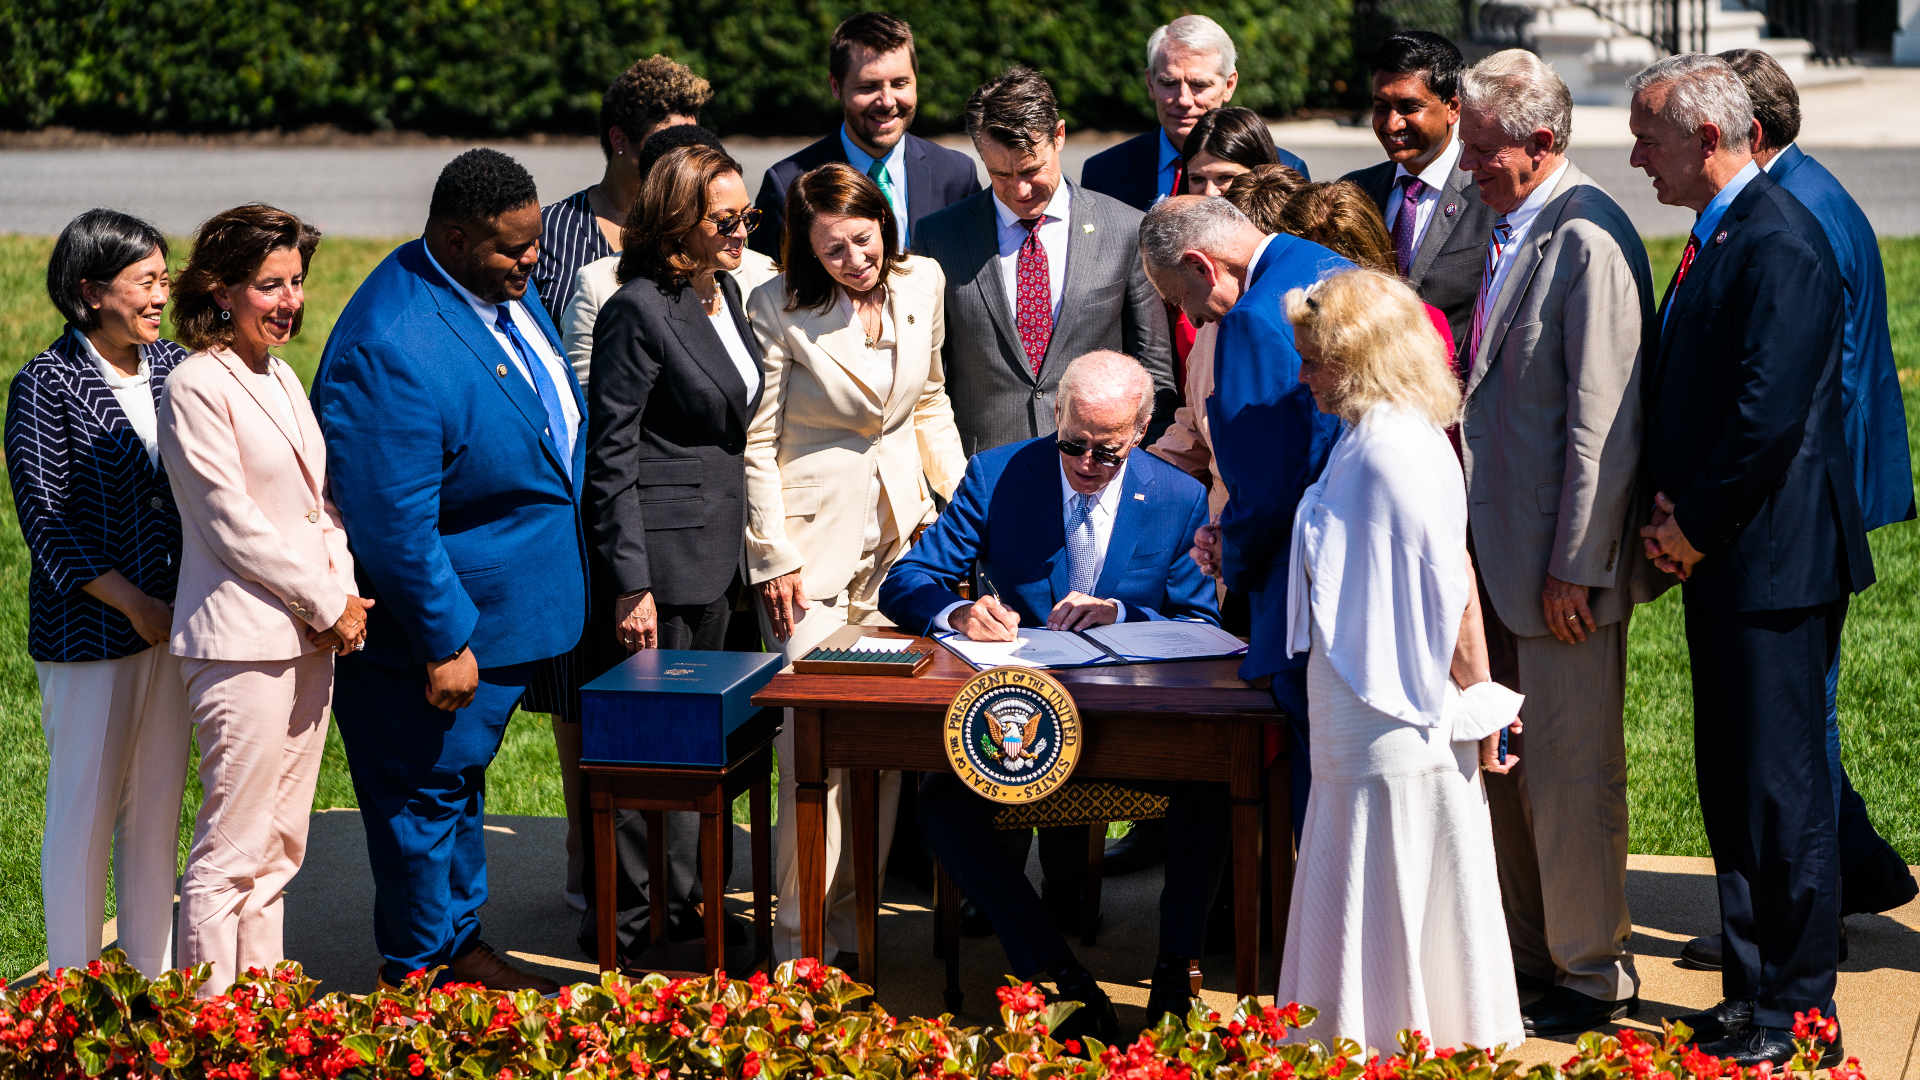 On the South Lawn of the White House in August, President Joe Biden signs into law the CHIPS and Science Act of 2022.